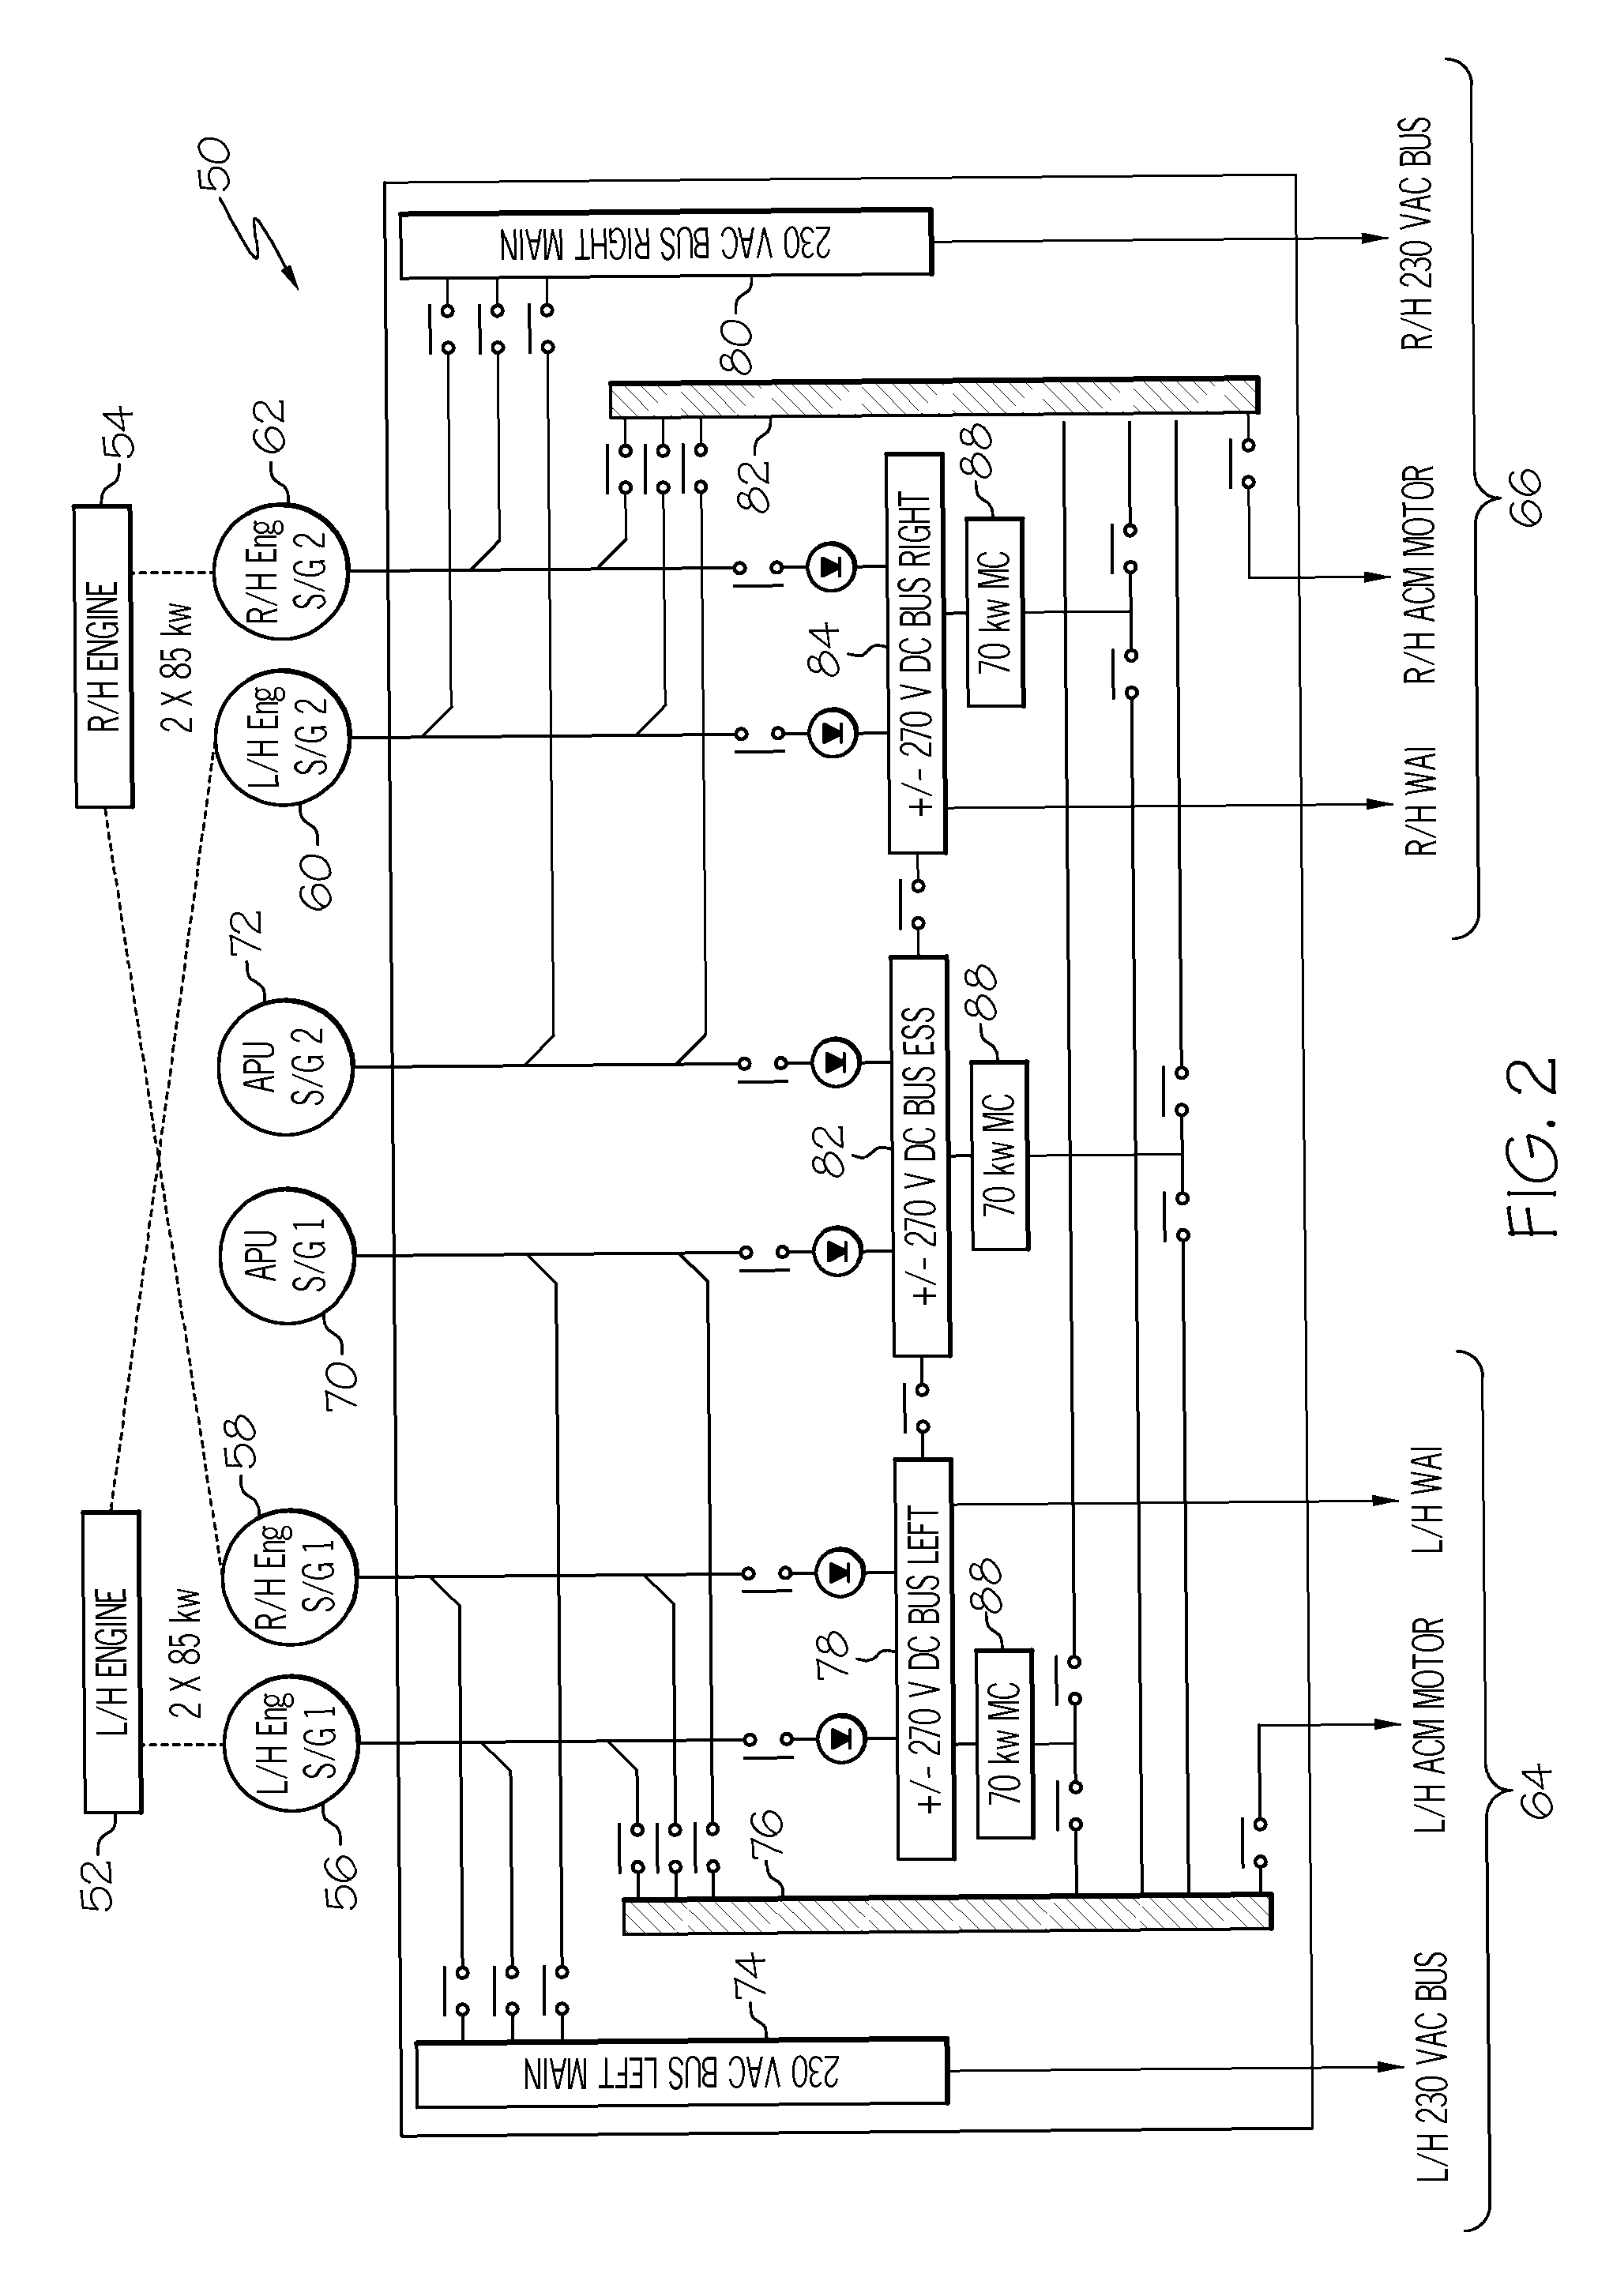 Smart hybrid electric and bleed architecture